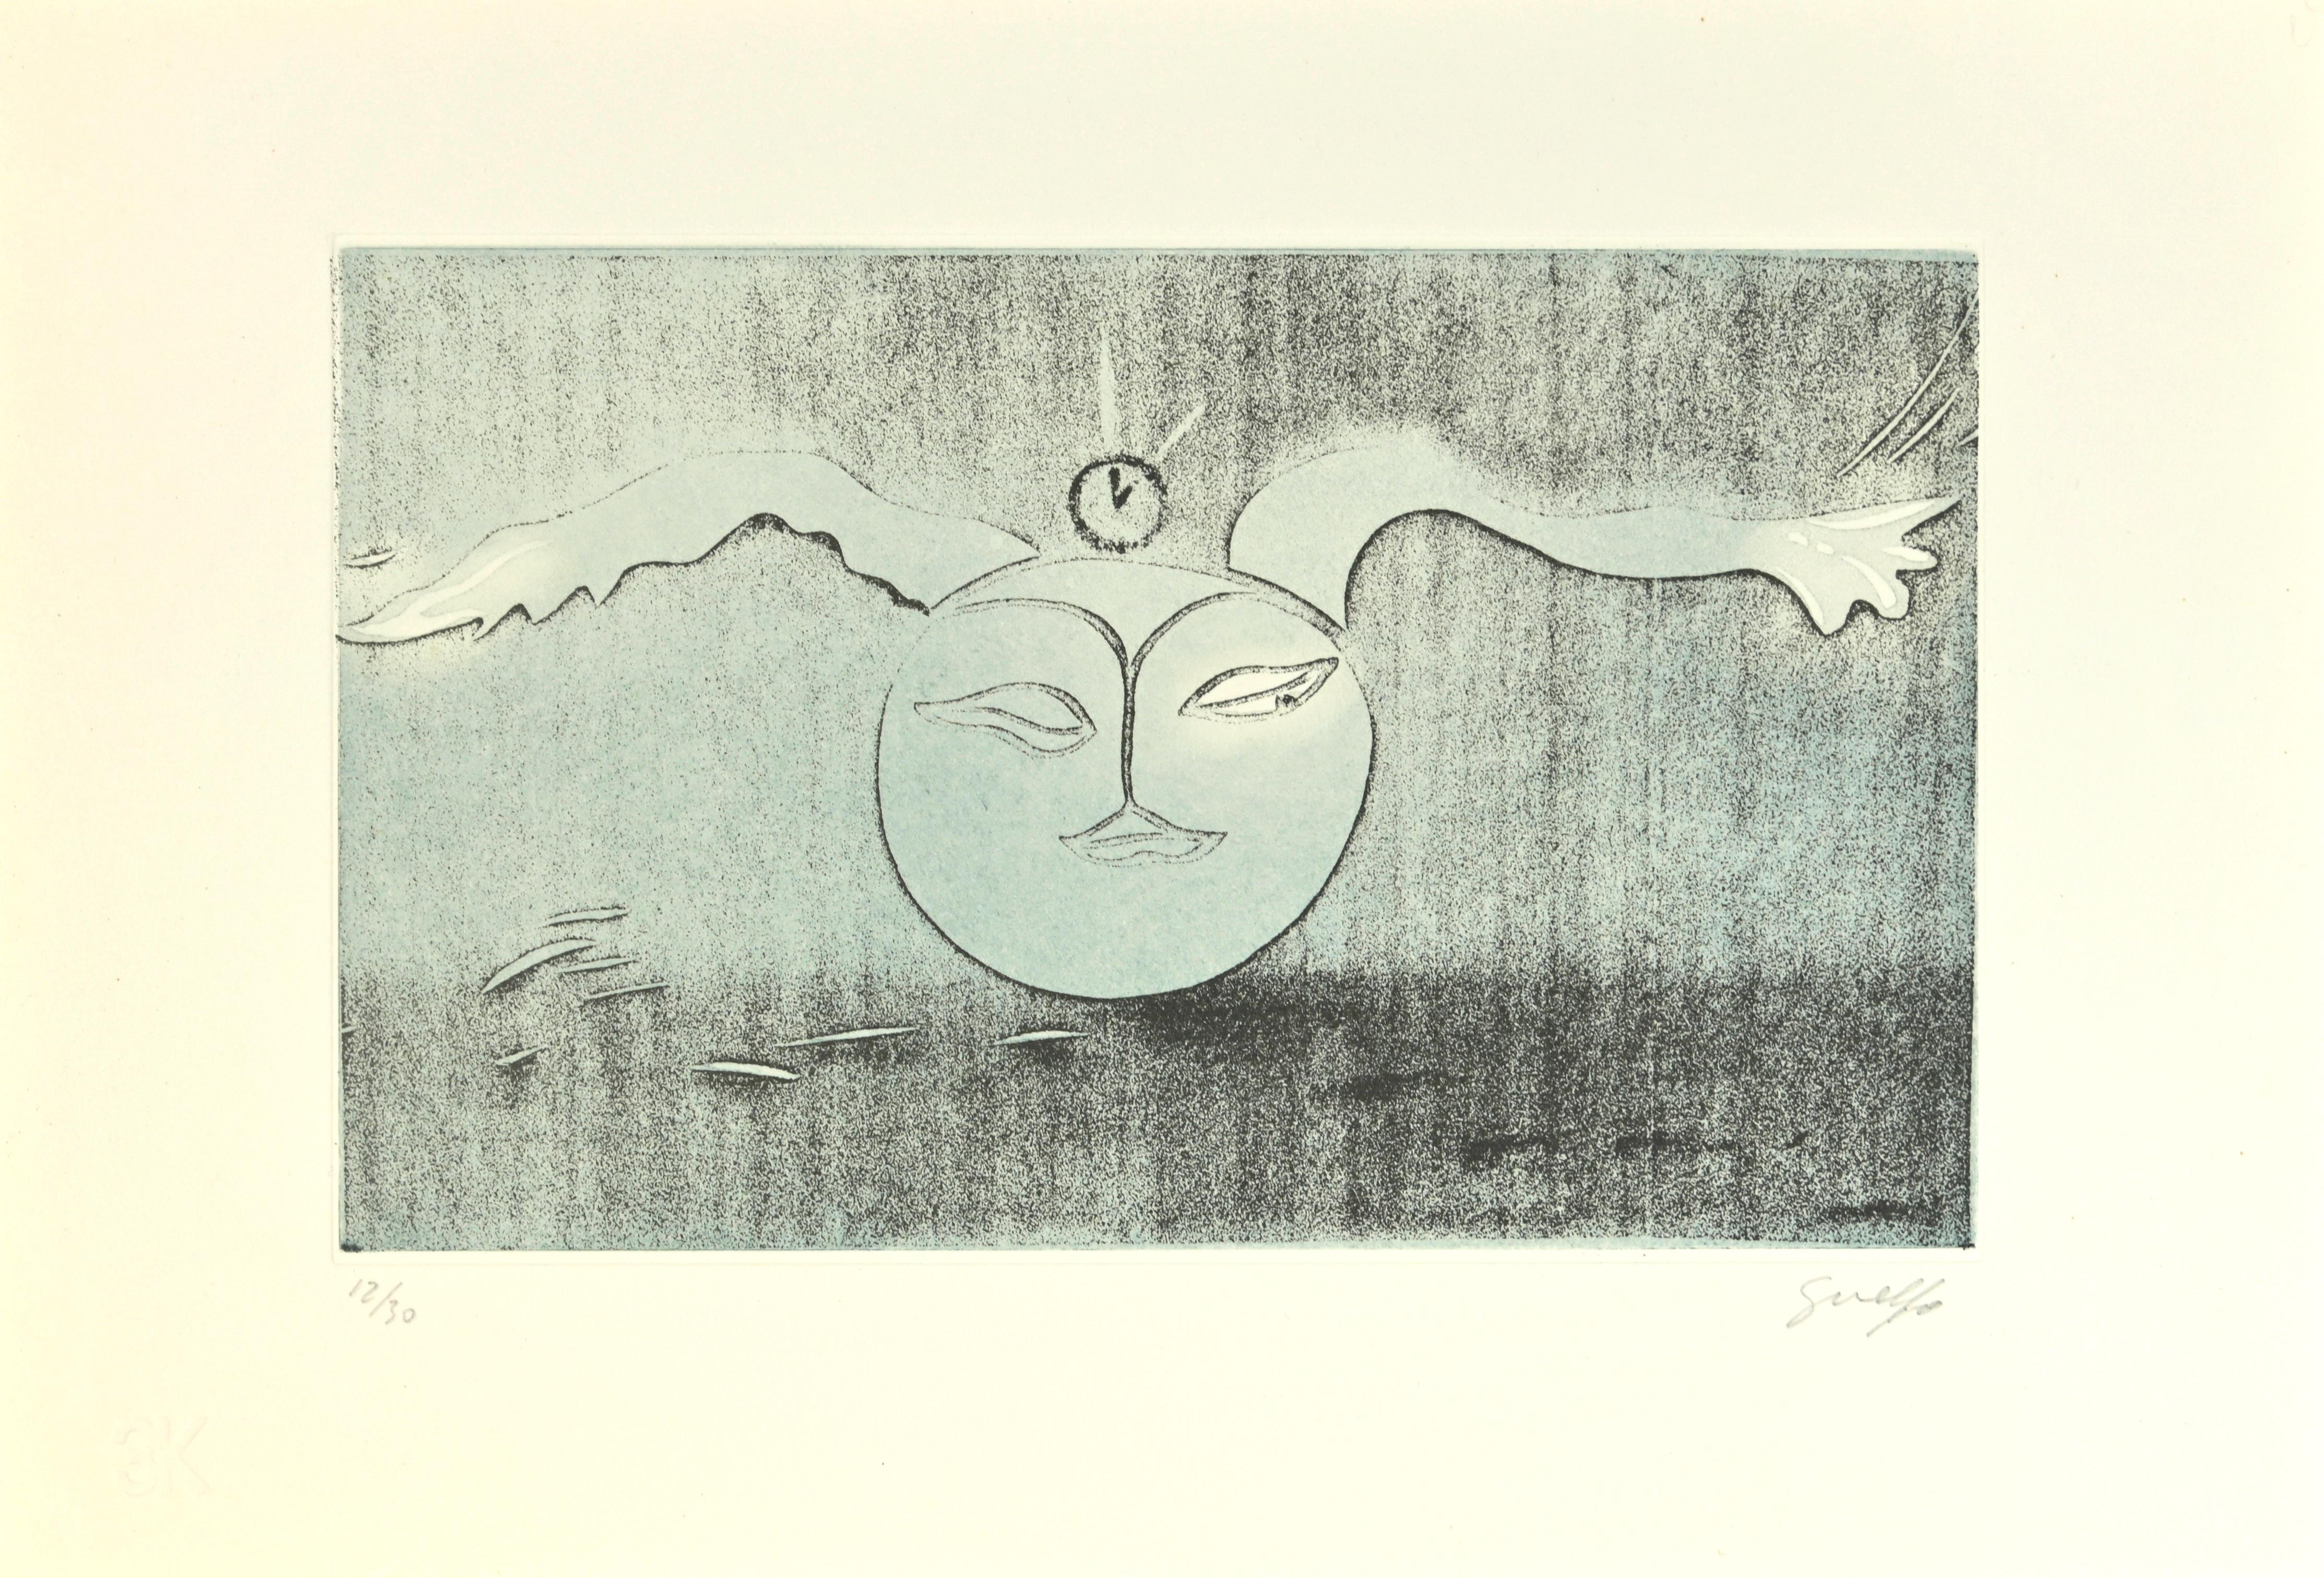 Lunar Poet  is a Contemporary Artwork realized in Italy by  Guelfo Bianchini  (Ancona, 1937) in 1978 .

Colored Etching on paper. 

Hand-signed  in pencil on the lower right corner:  Guelfo 7  Numbered by the artist on the lower left corner in